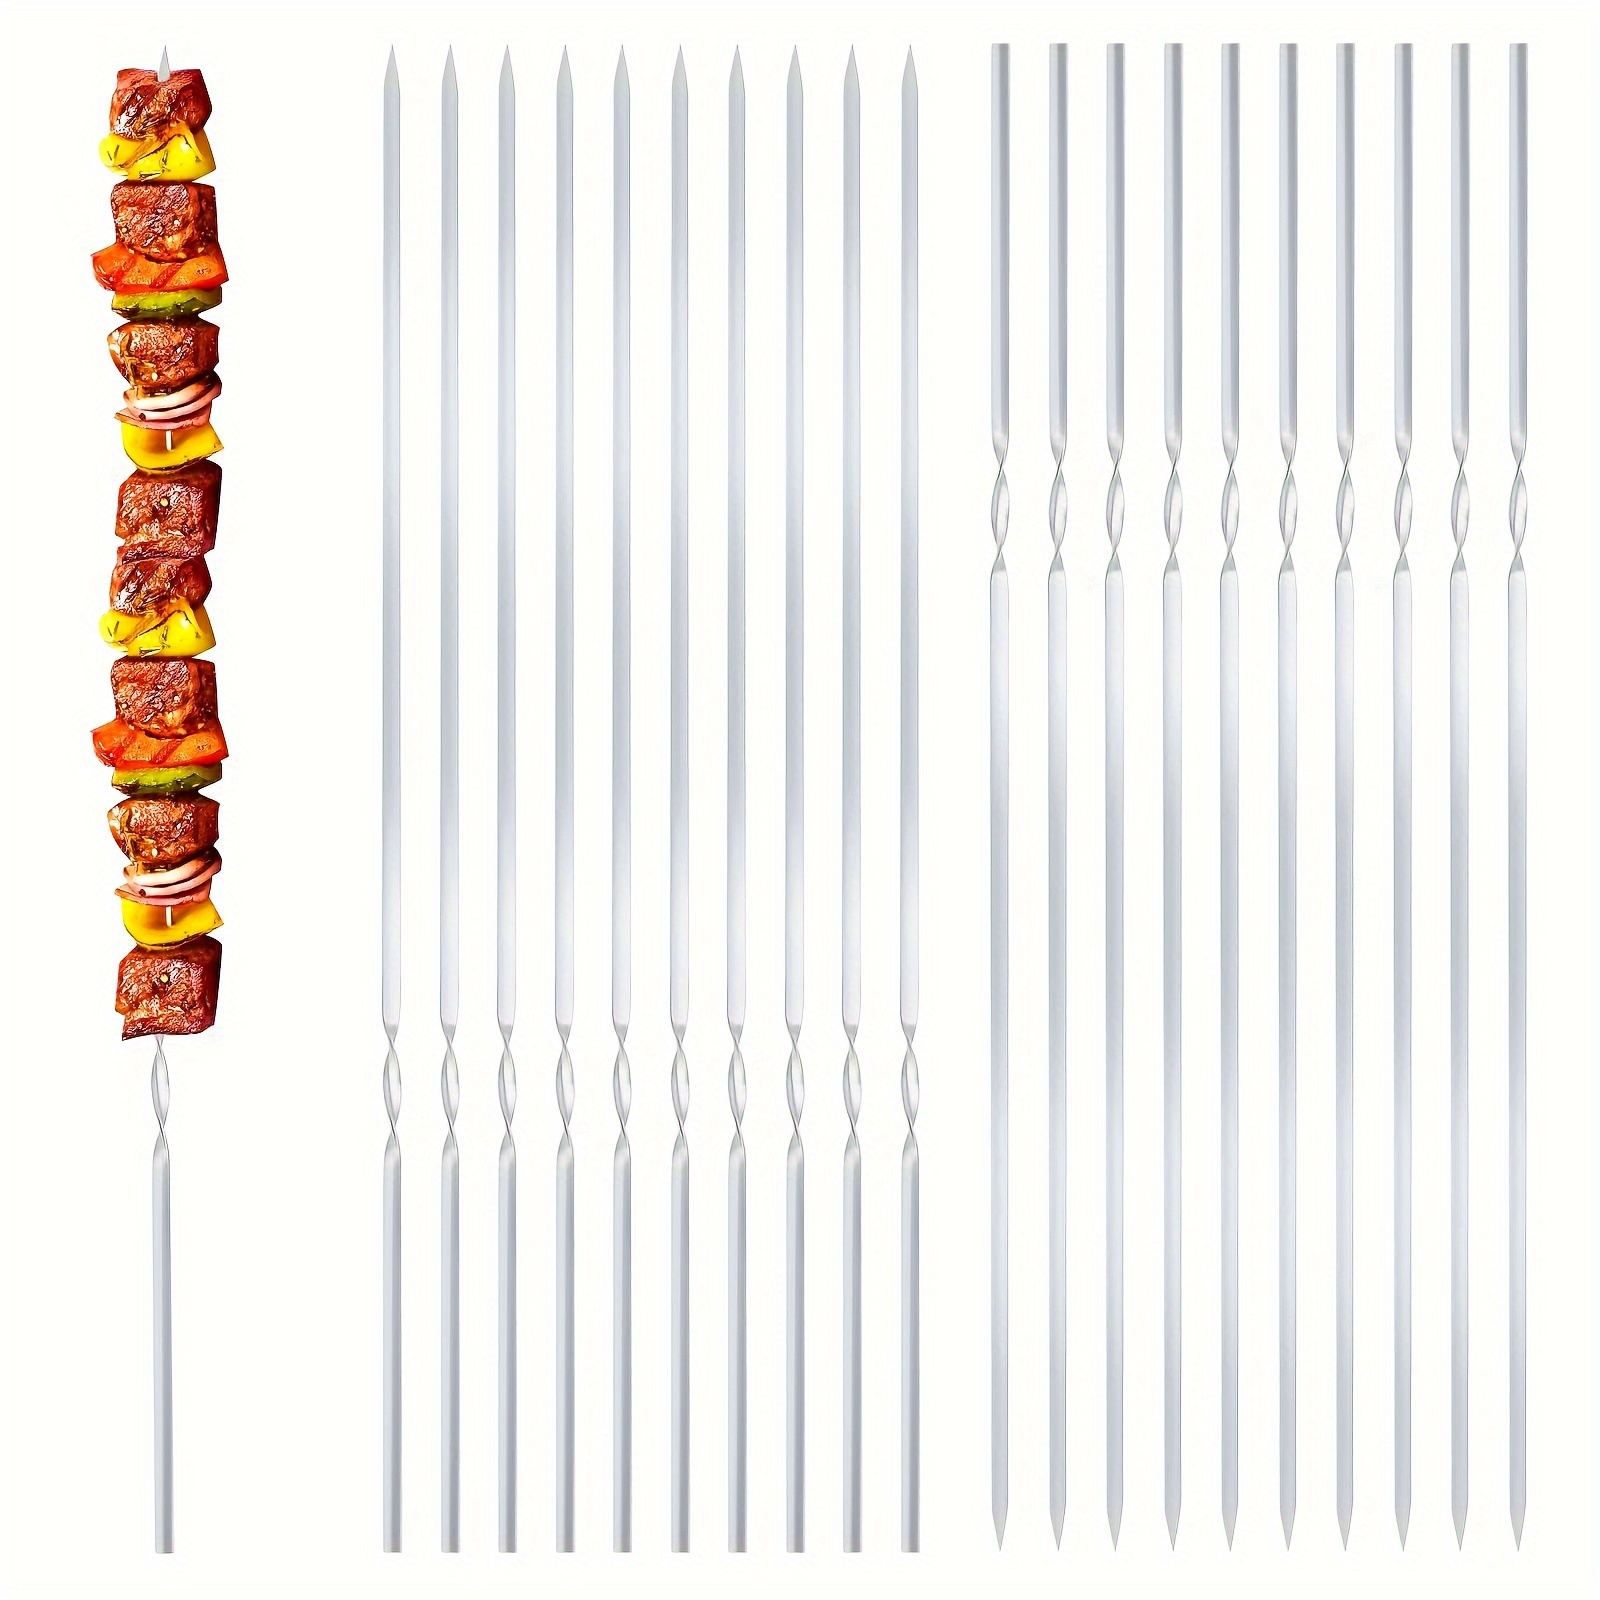 

20-pack Stainless Steel Bbq Skewers, 12.99 Inch Flat Metal Grilling Skewers For Kabobs, Beef, Shrimp, Chicken, And Vegetables, Durable Barbecue Skewer Sticks With Angle Tip Safe Piercing Design